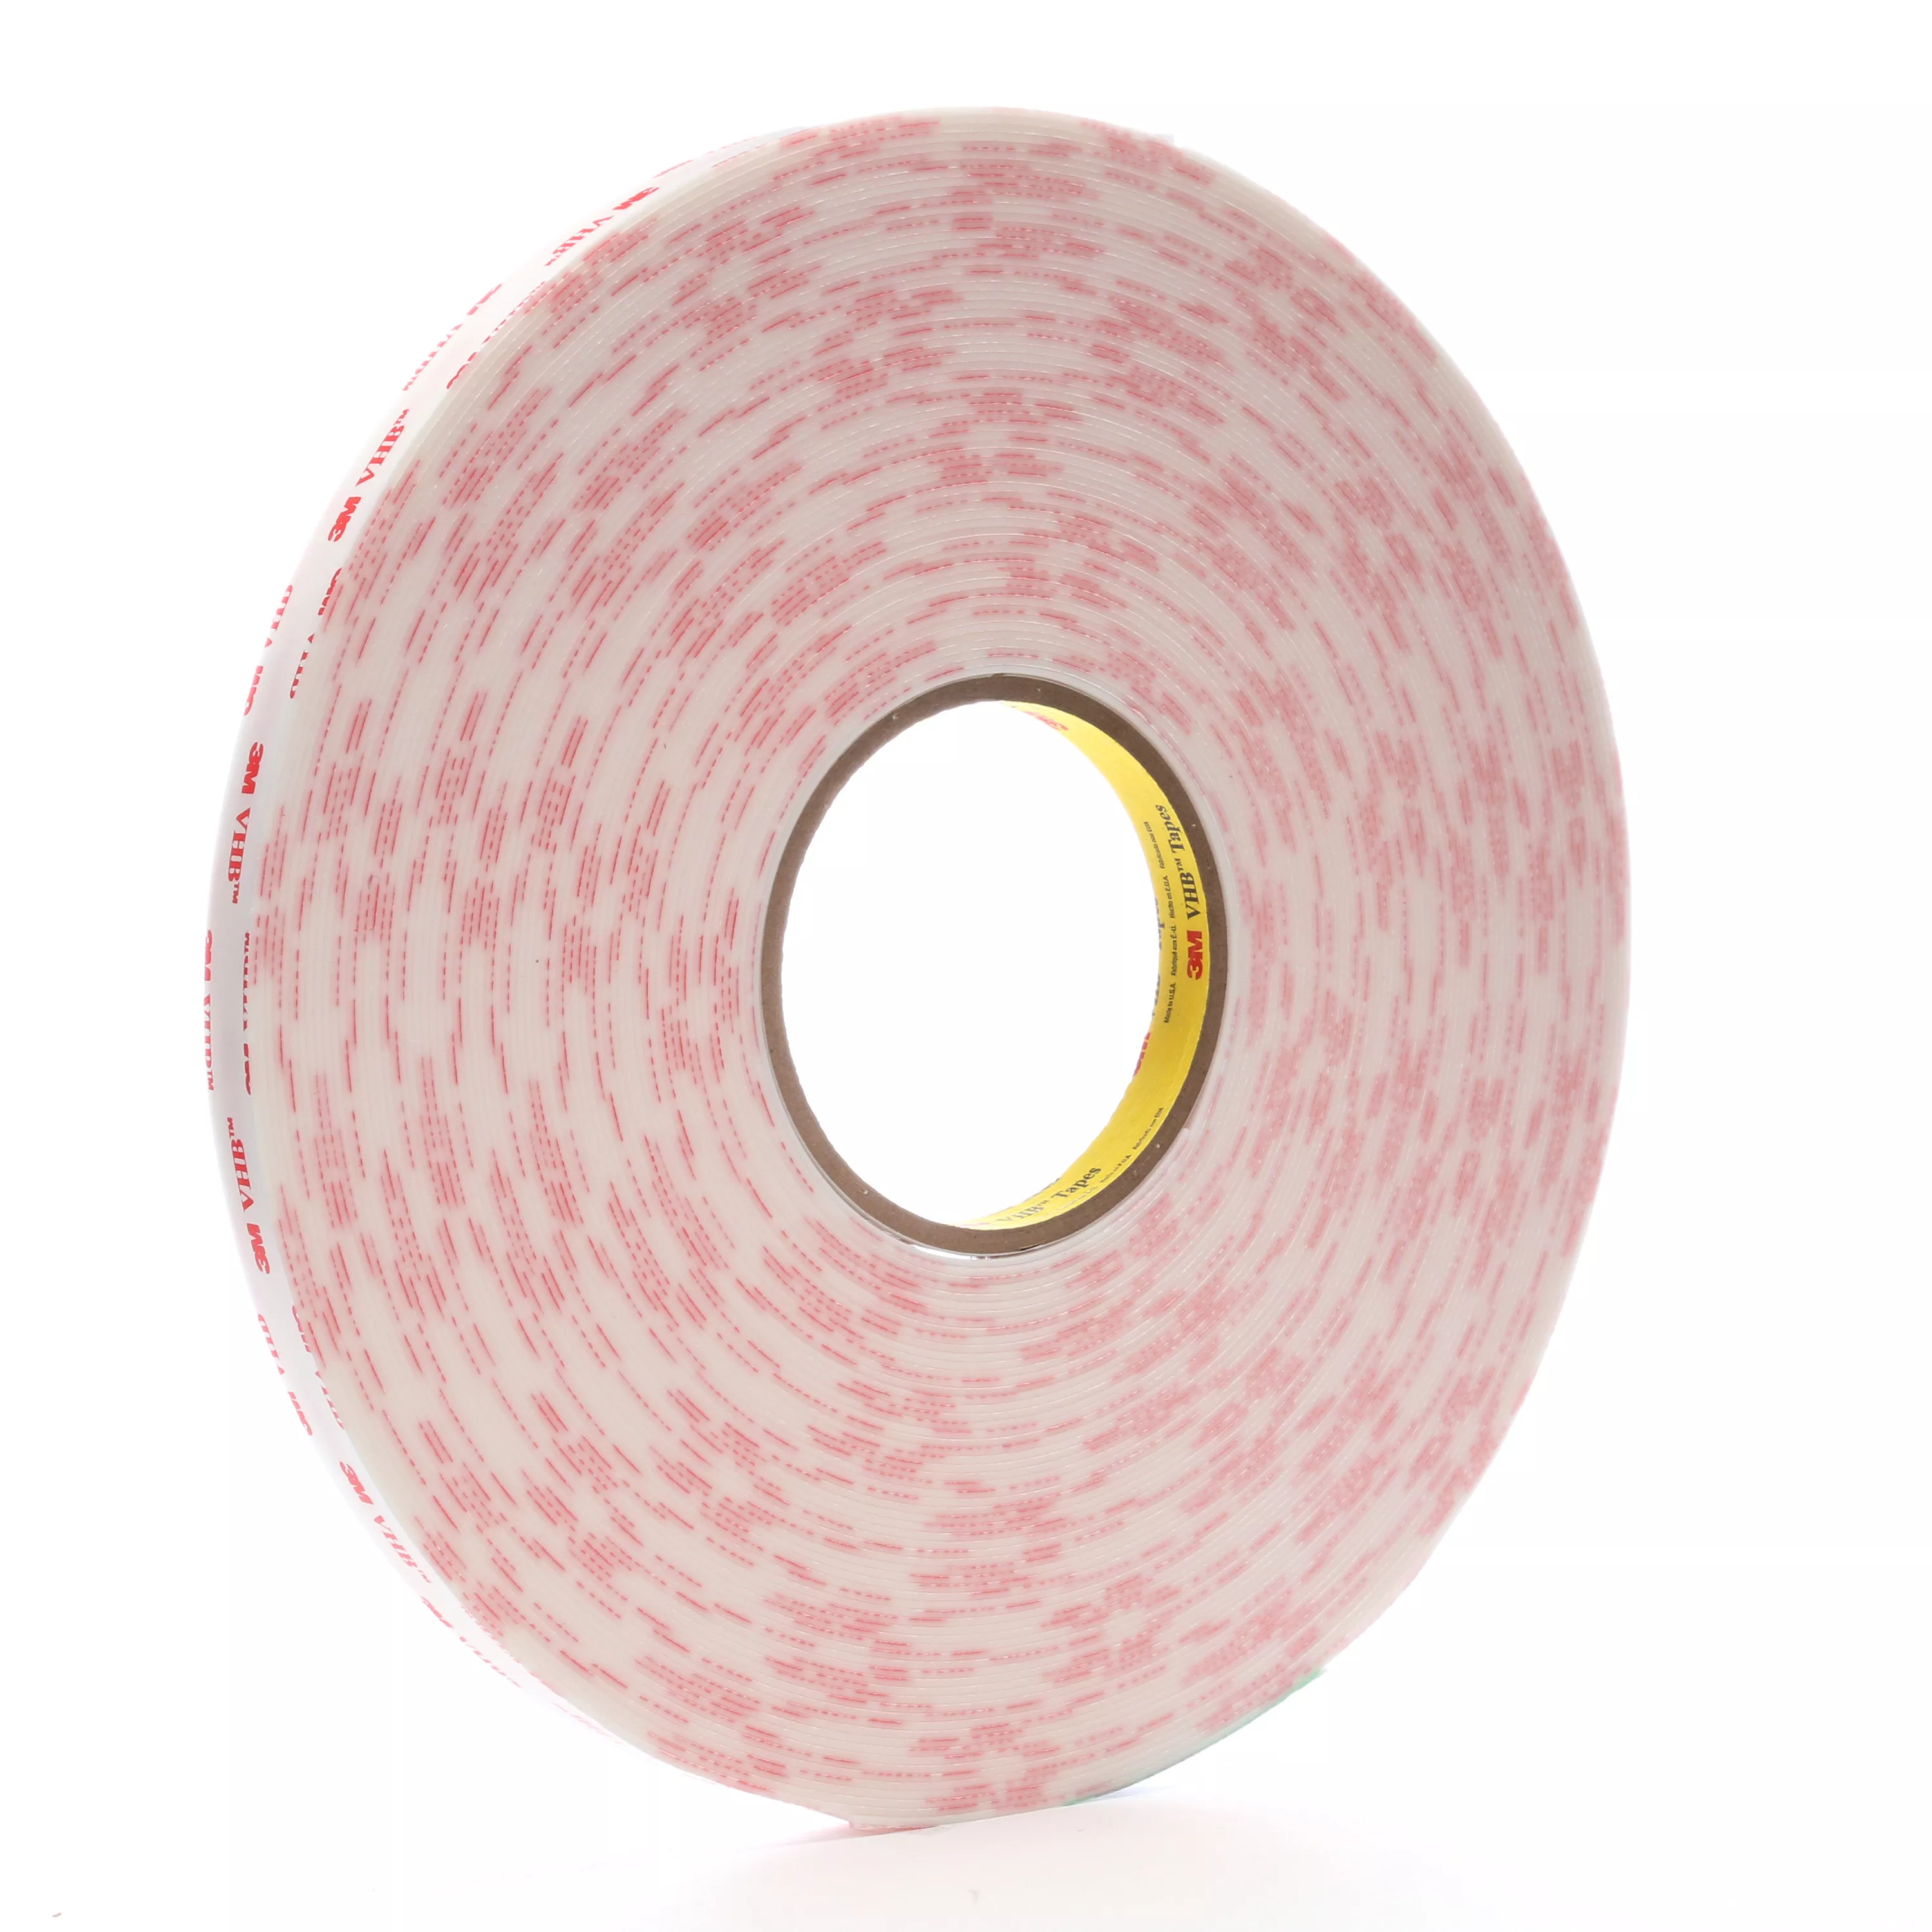 Product Number 4945 | 3M™ VHB™ Tape 4945